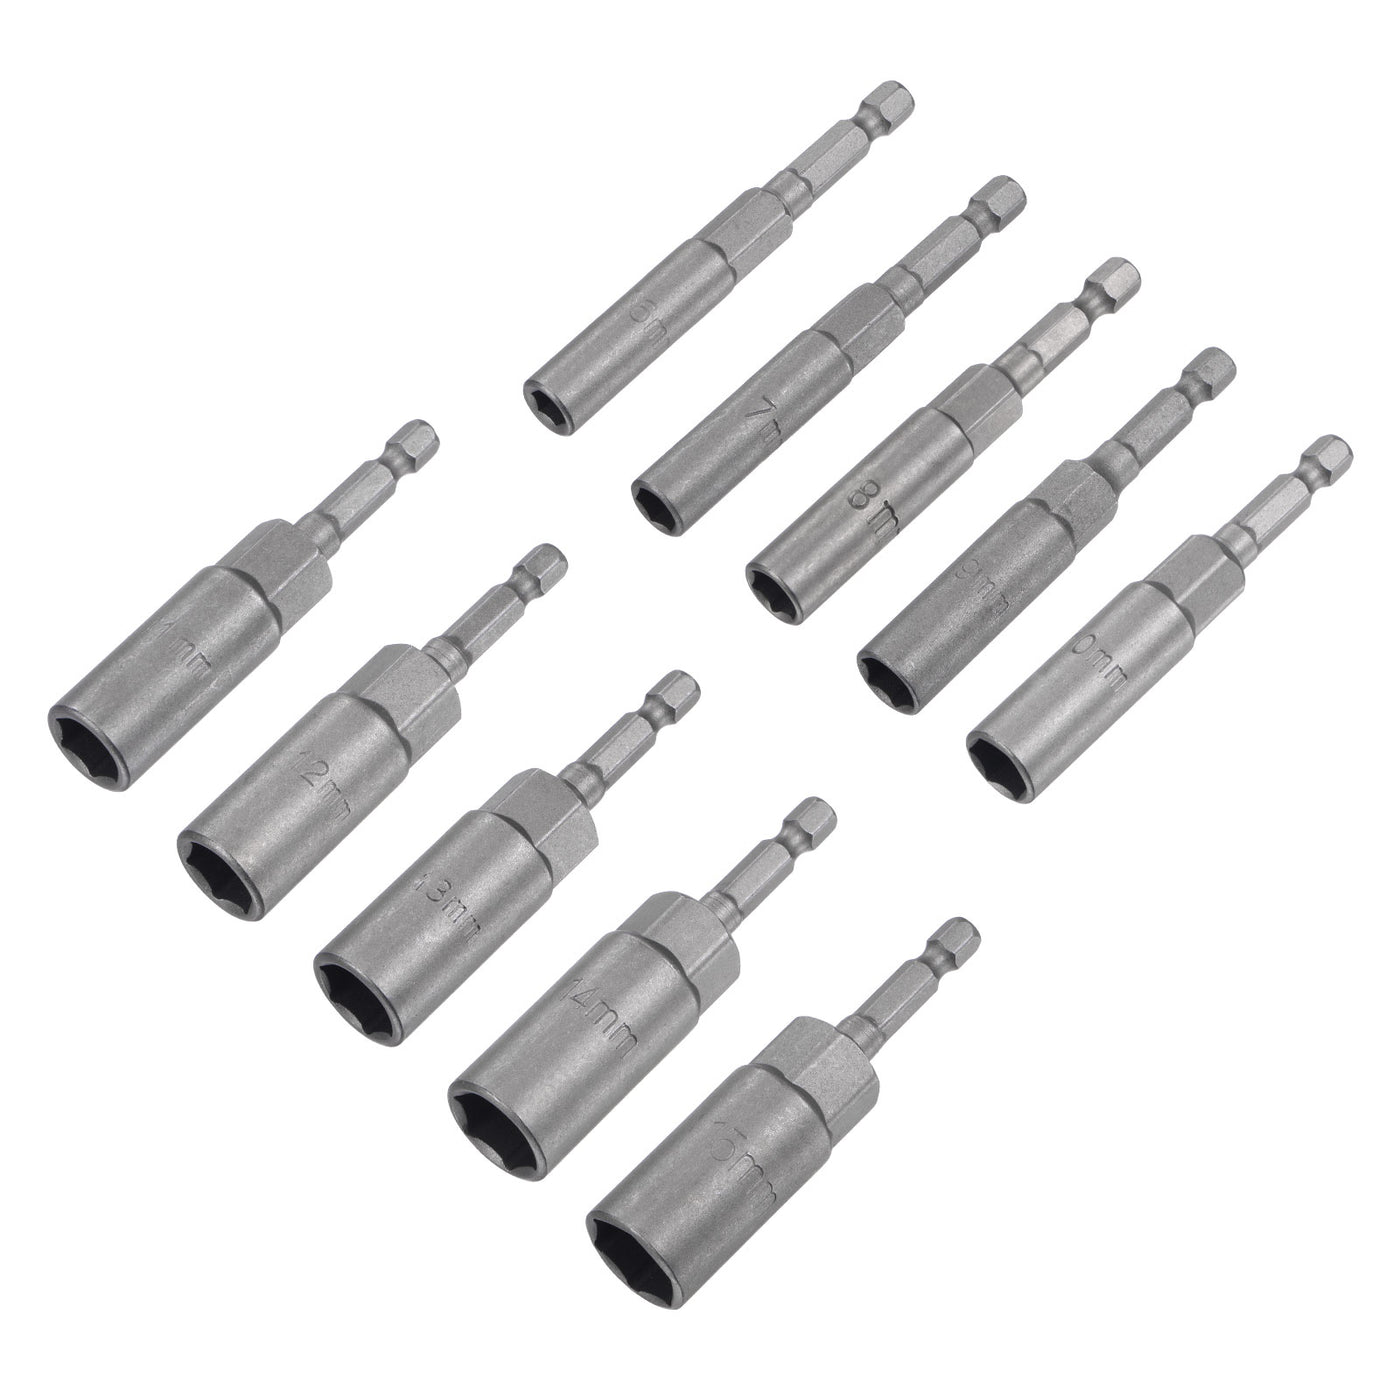 uxcell Uxcell 1/4" Quick-Change Hex Shank 6-15mm Nut Driver Bit Set of 10pcs, No-magnetic CR-V